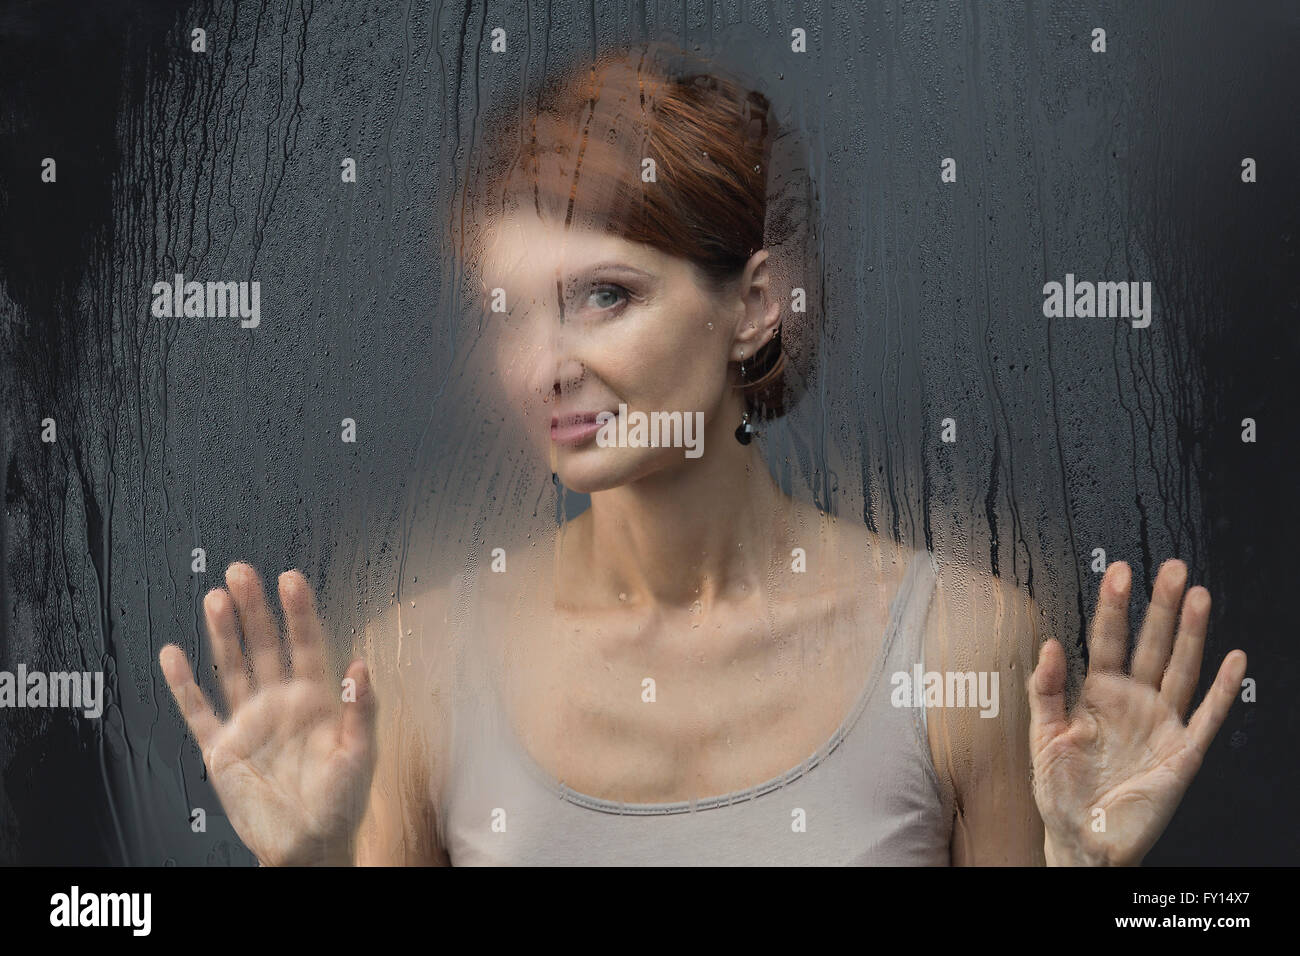 Beautiful woman standing in front on condensed glass against black background Stock Photo